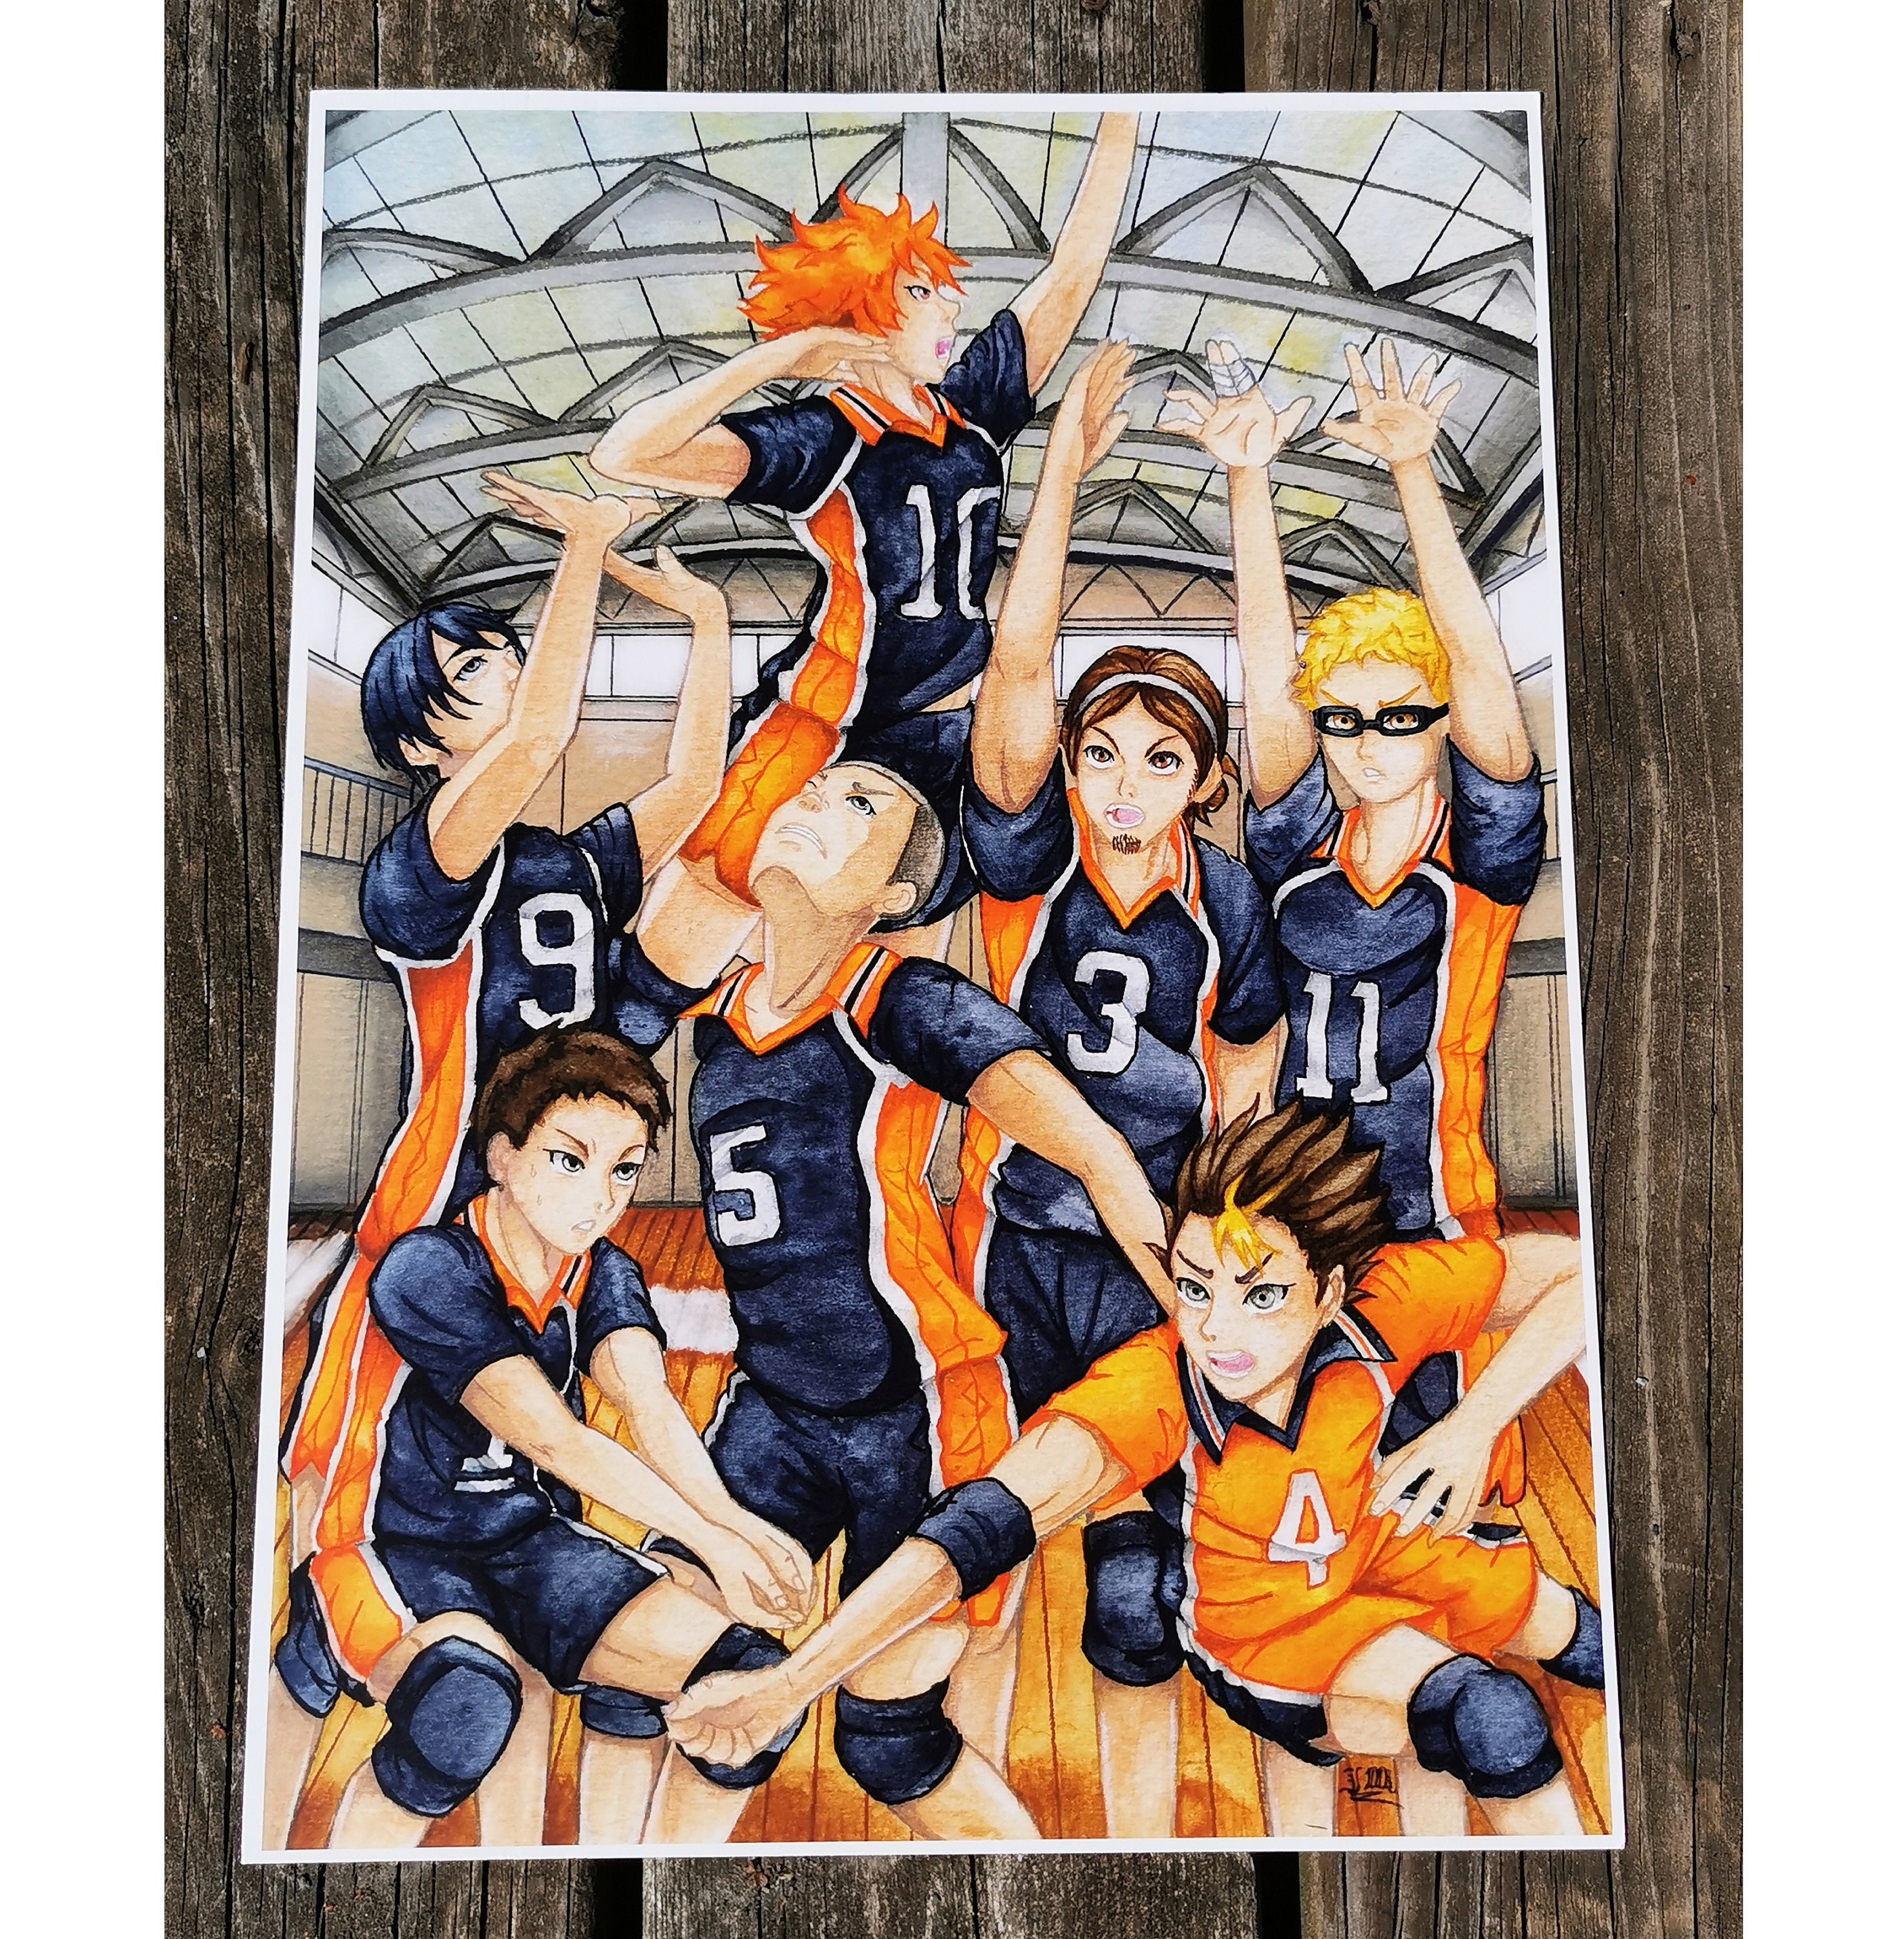 Haikyuu Anime King of Court Poster : Buy Online at Best Price in KSA - Souq  is now : Home